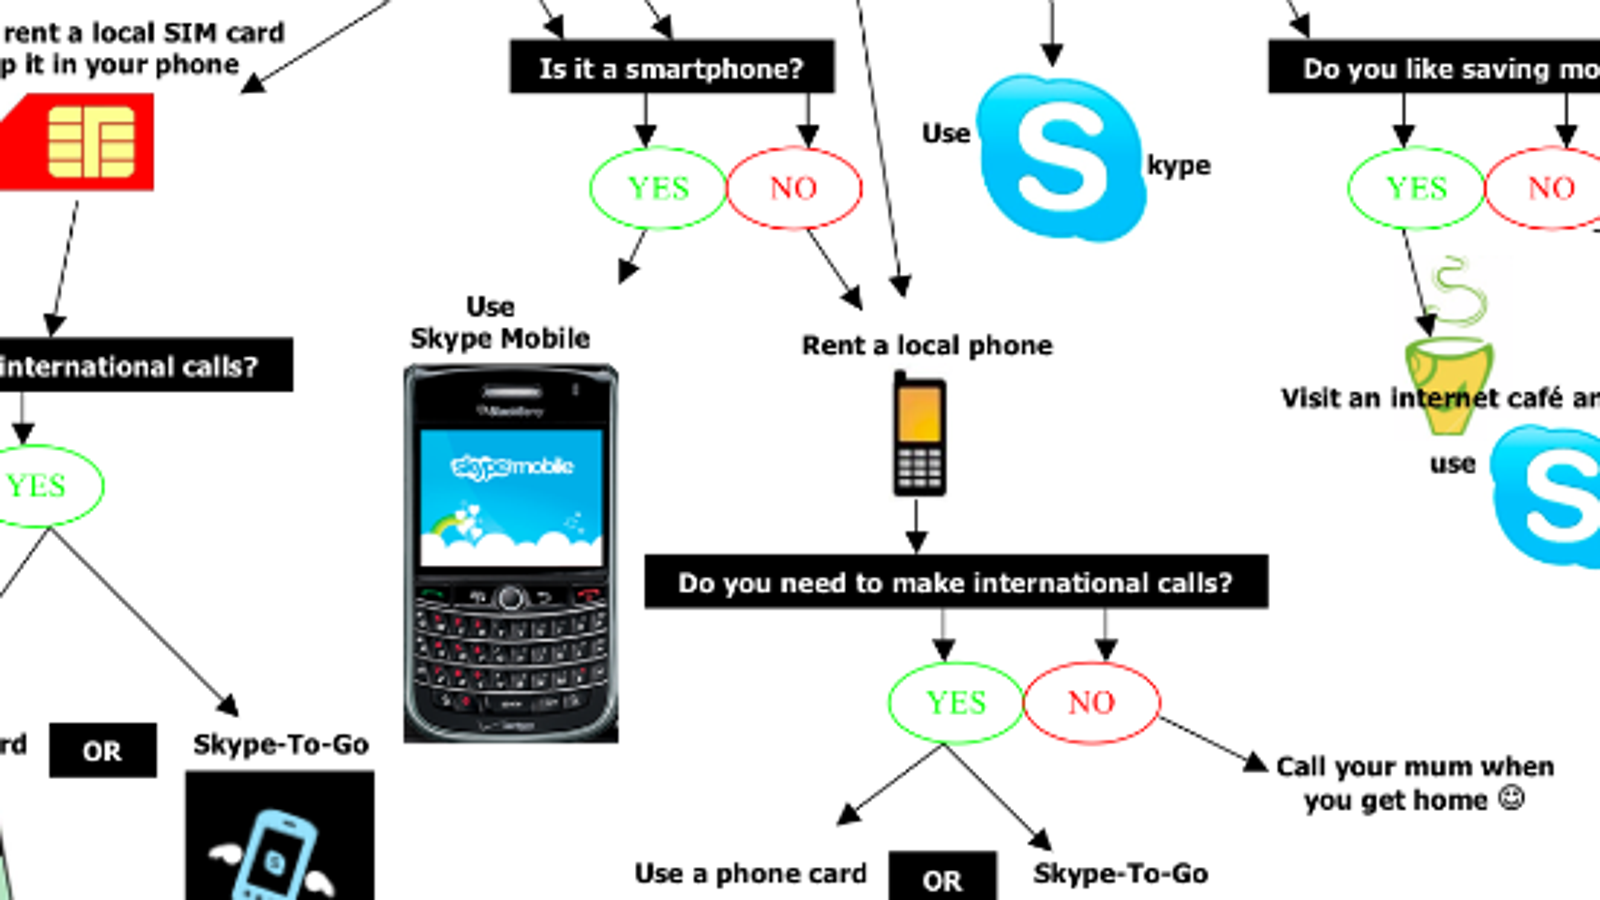 quot How Should I Call? quot Flowchart Explains Your Overseas Cellphone and